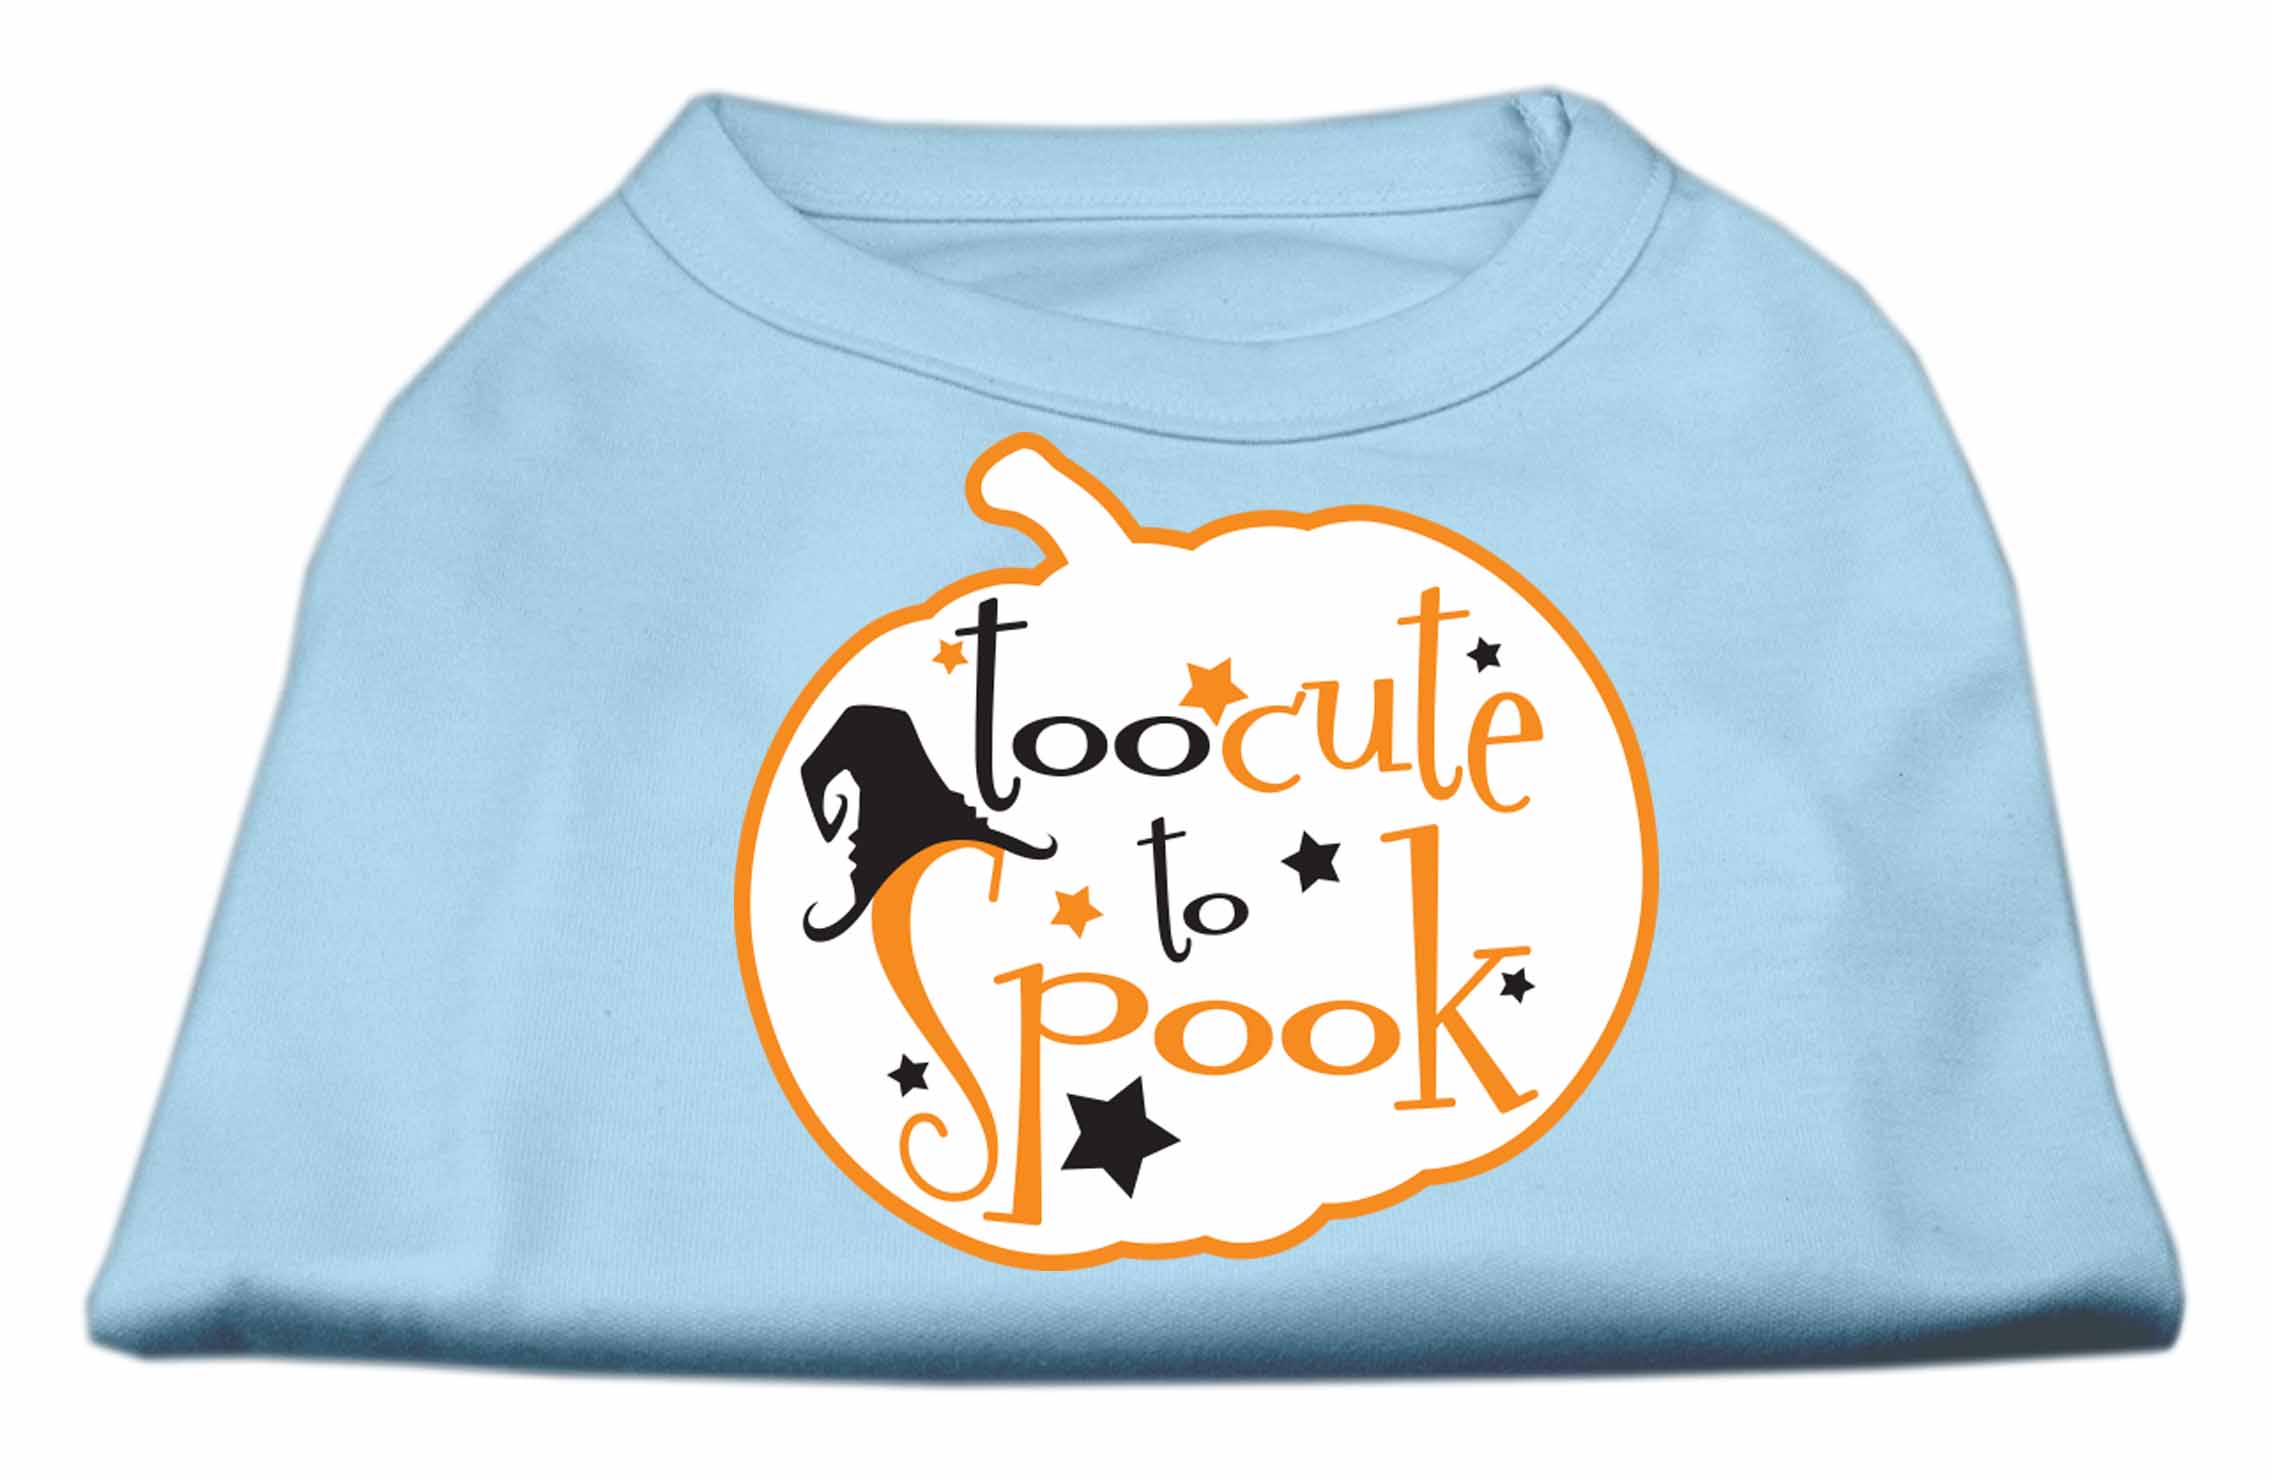 Too Cute to Spook Screen Print Dog Shirt Baby Blue Med